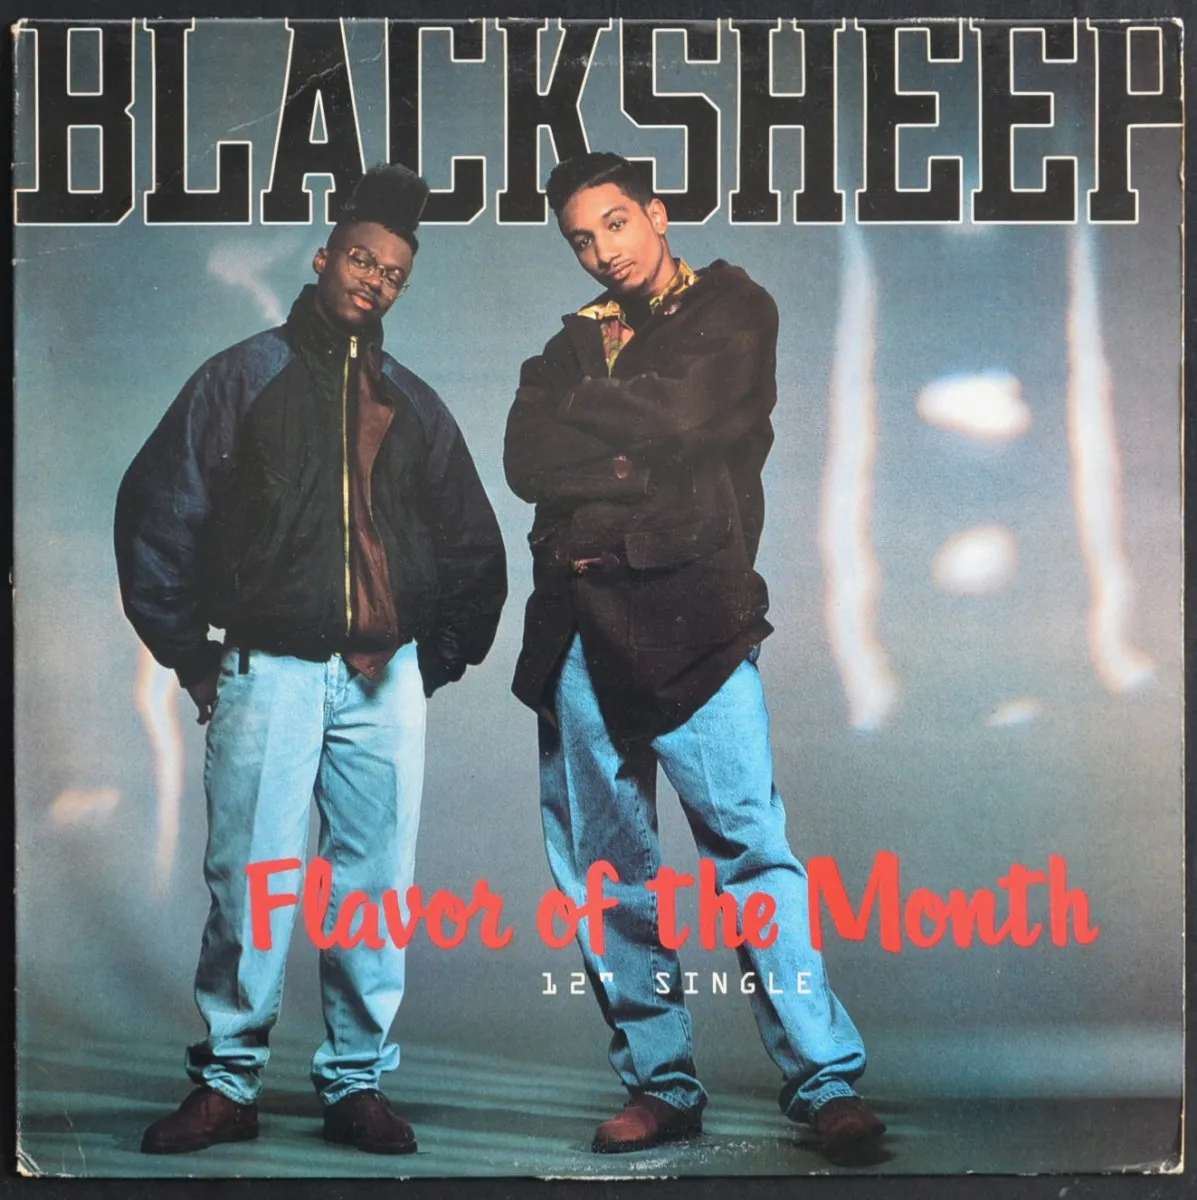 Black Sheep - Flavor of the Month : 7inch